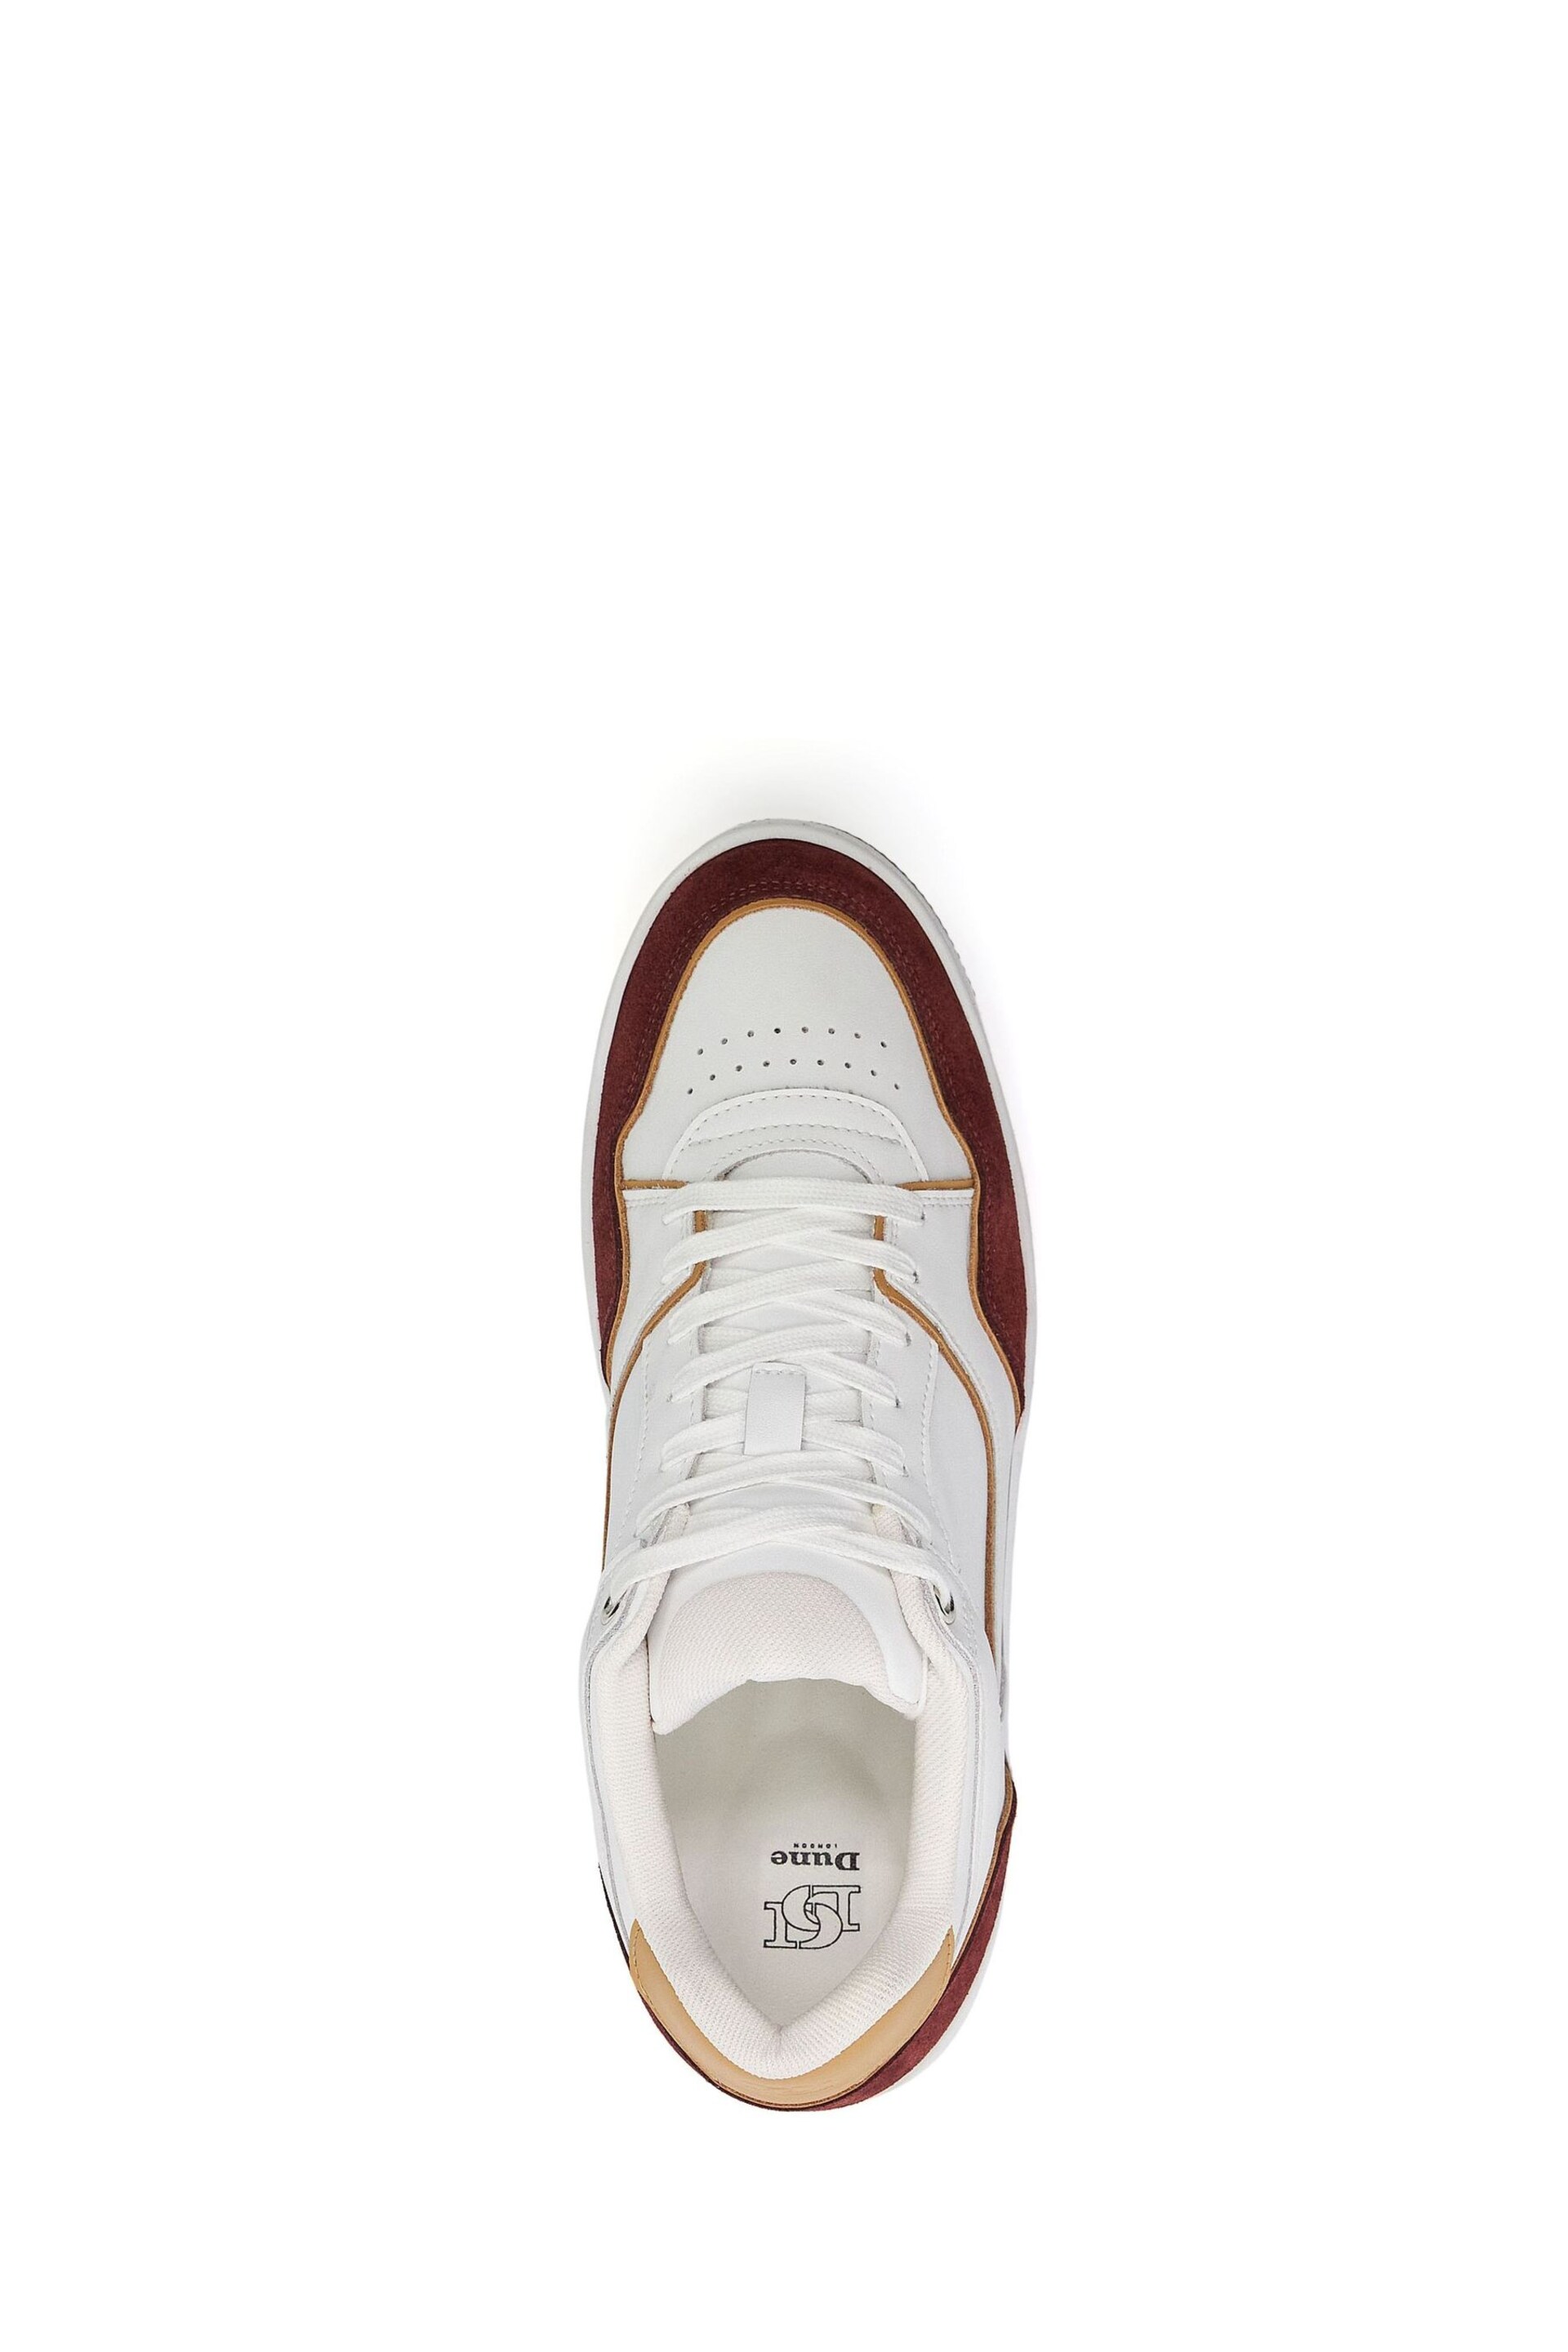 Dune London Red Tainted Chunky Court Trainers - Image 4 of 6